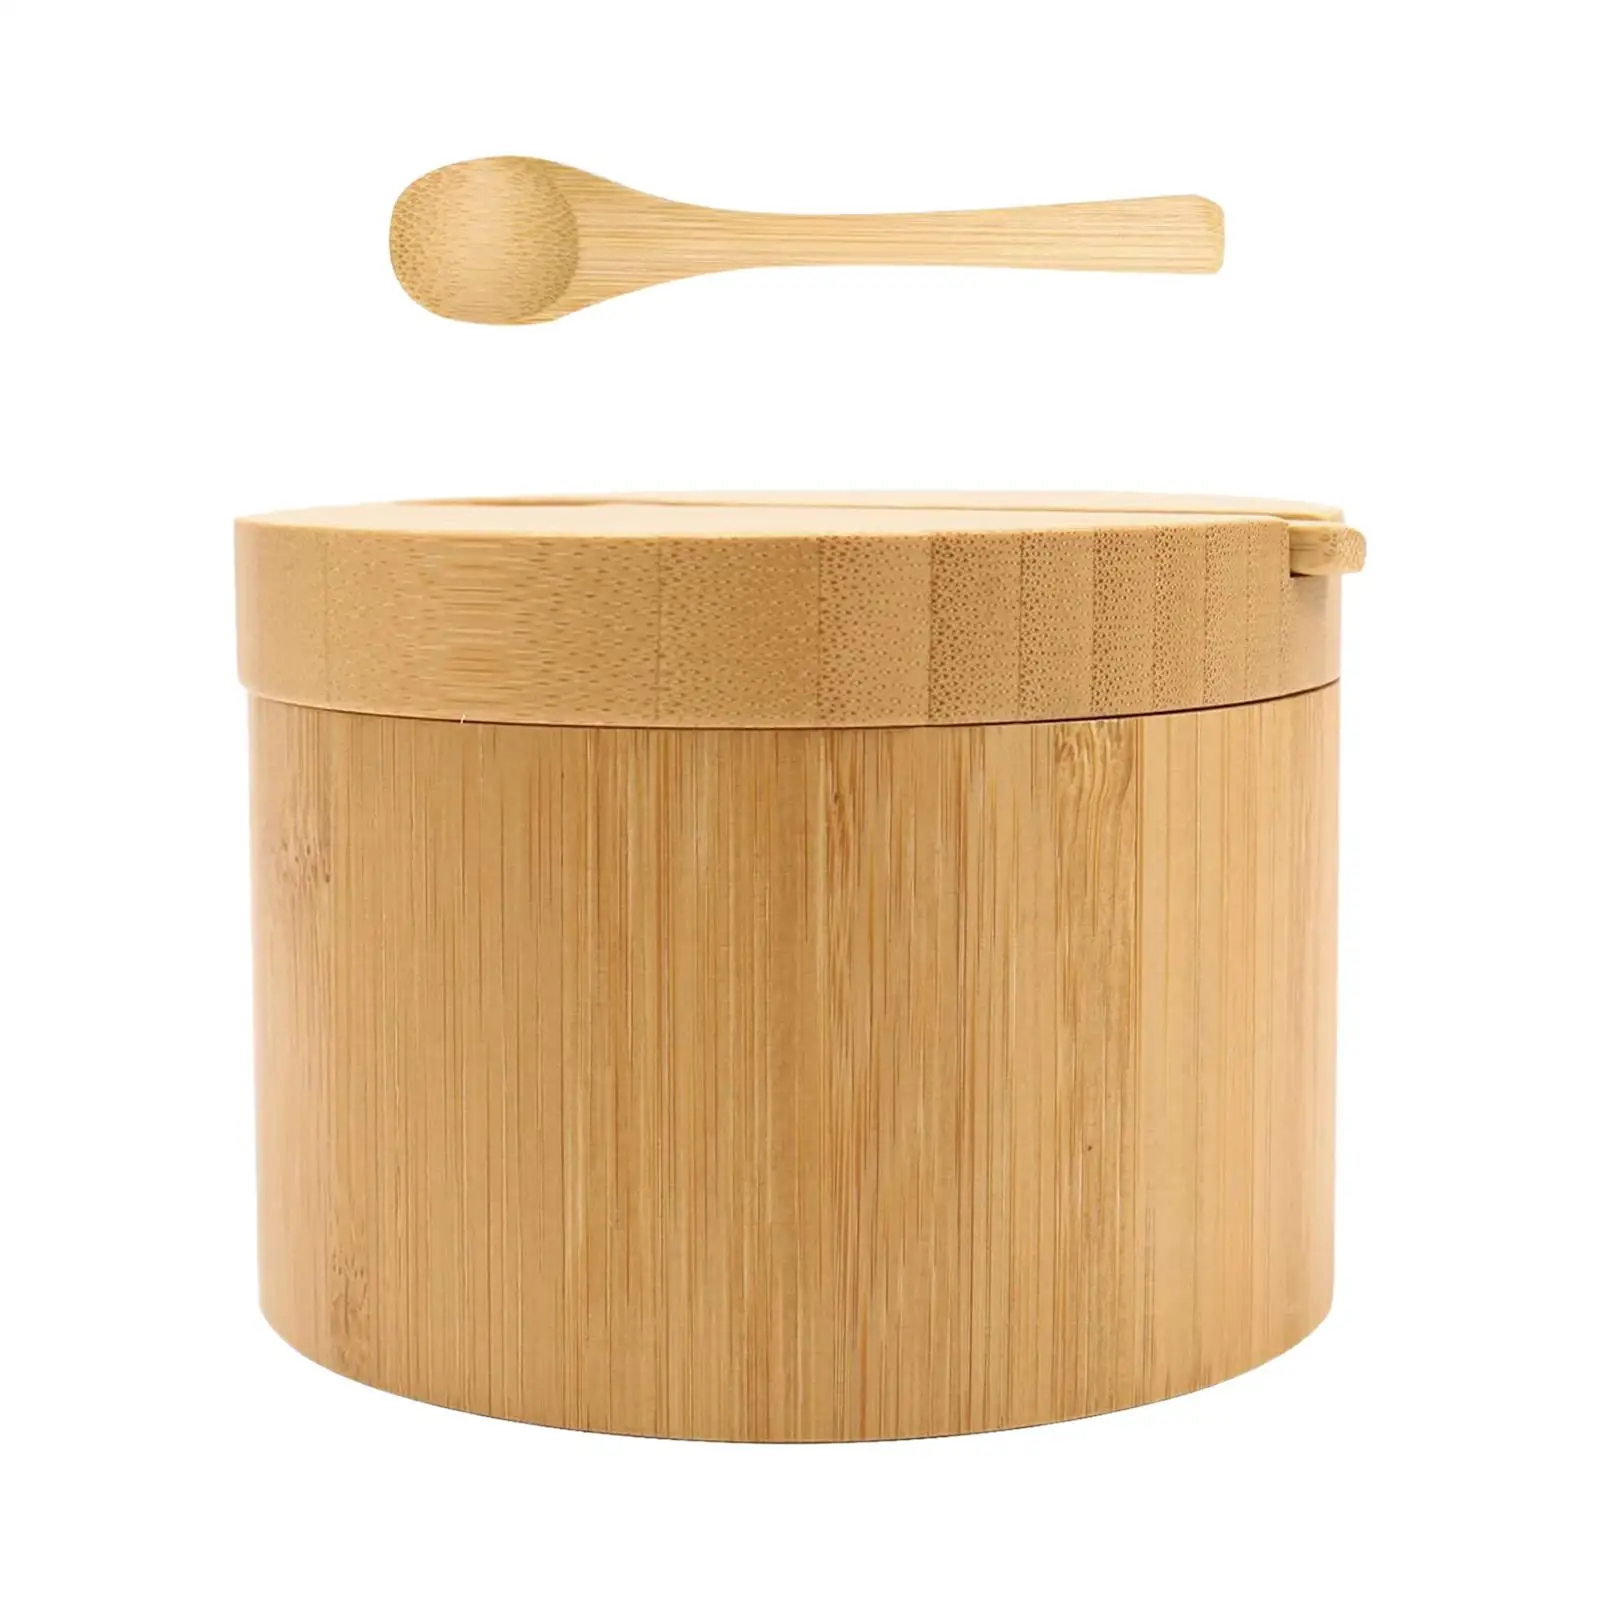 Wood Box for with Magnetic Lid and Spoon Cylinder Holder Desk Office Storage for Tea Salt Kitchen Countertop